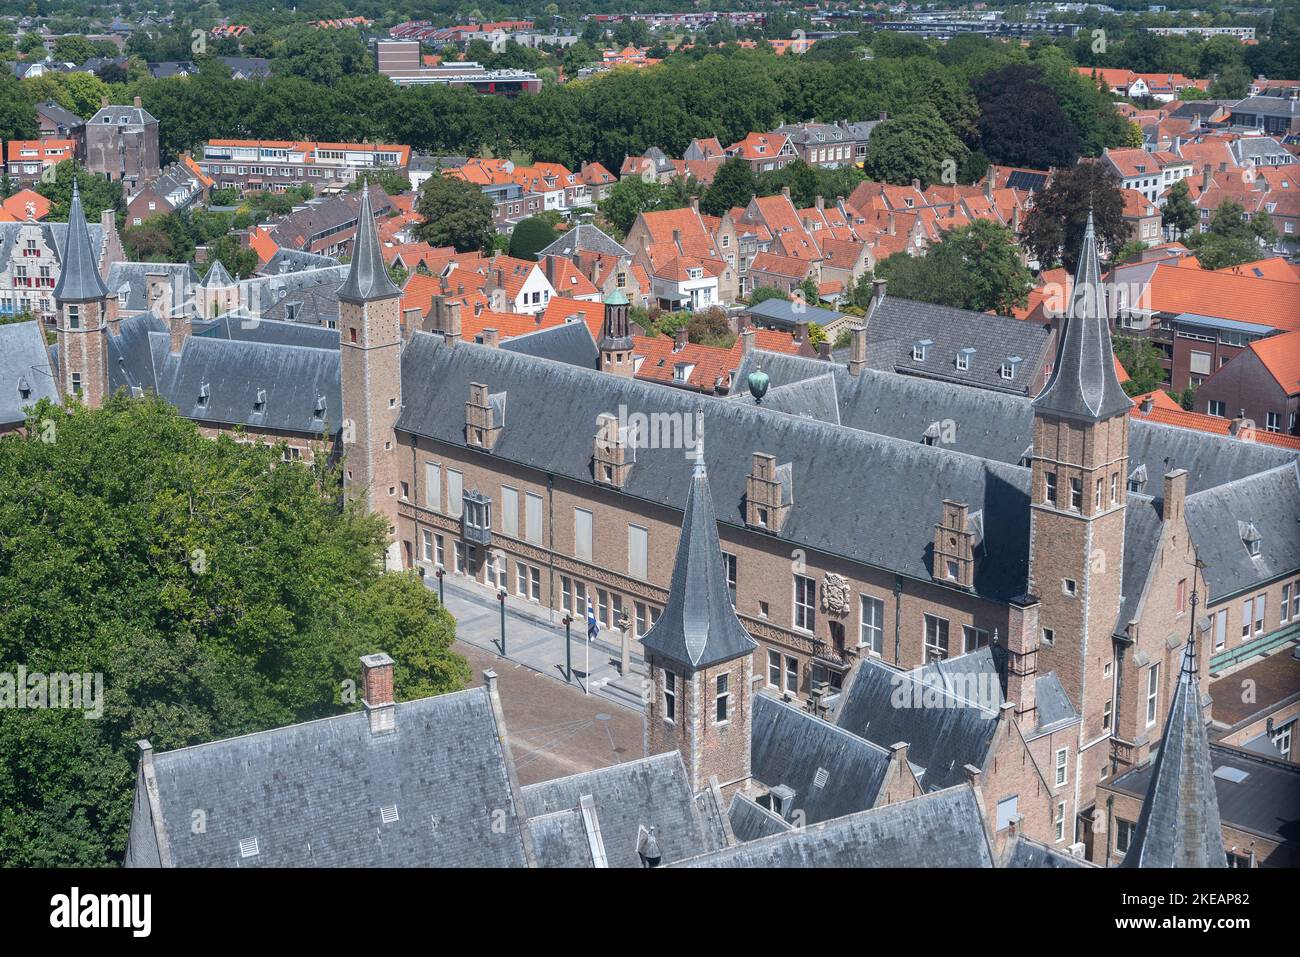 View of the ensemble of the historic abbey from the Lange Jan church tower, Middelburg, Zeeland, Netherlands, Europe Stock Photo